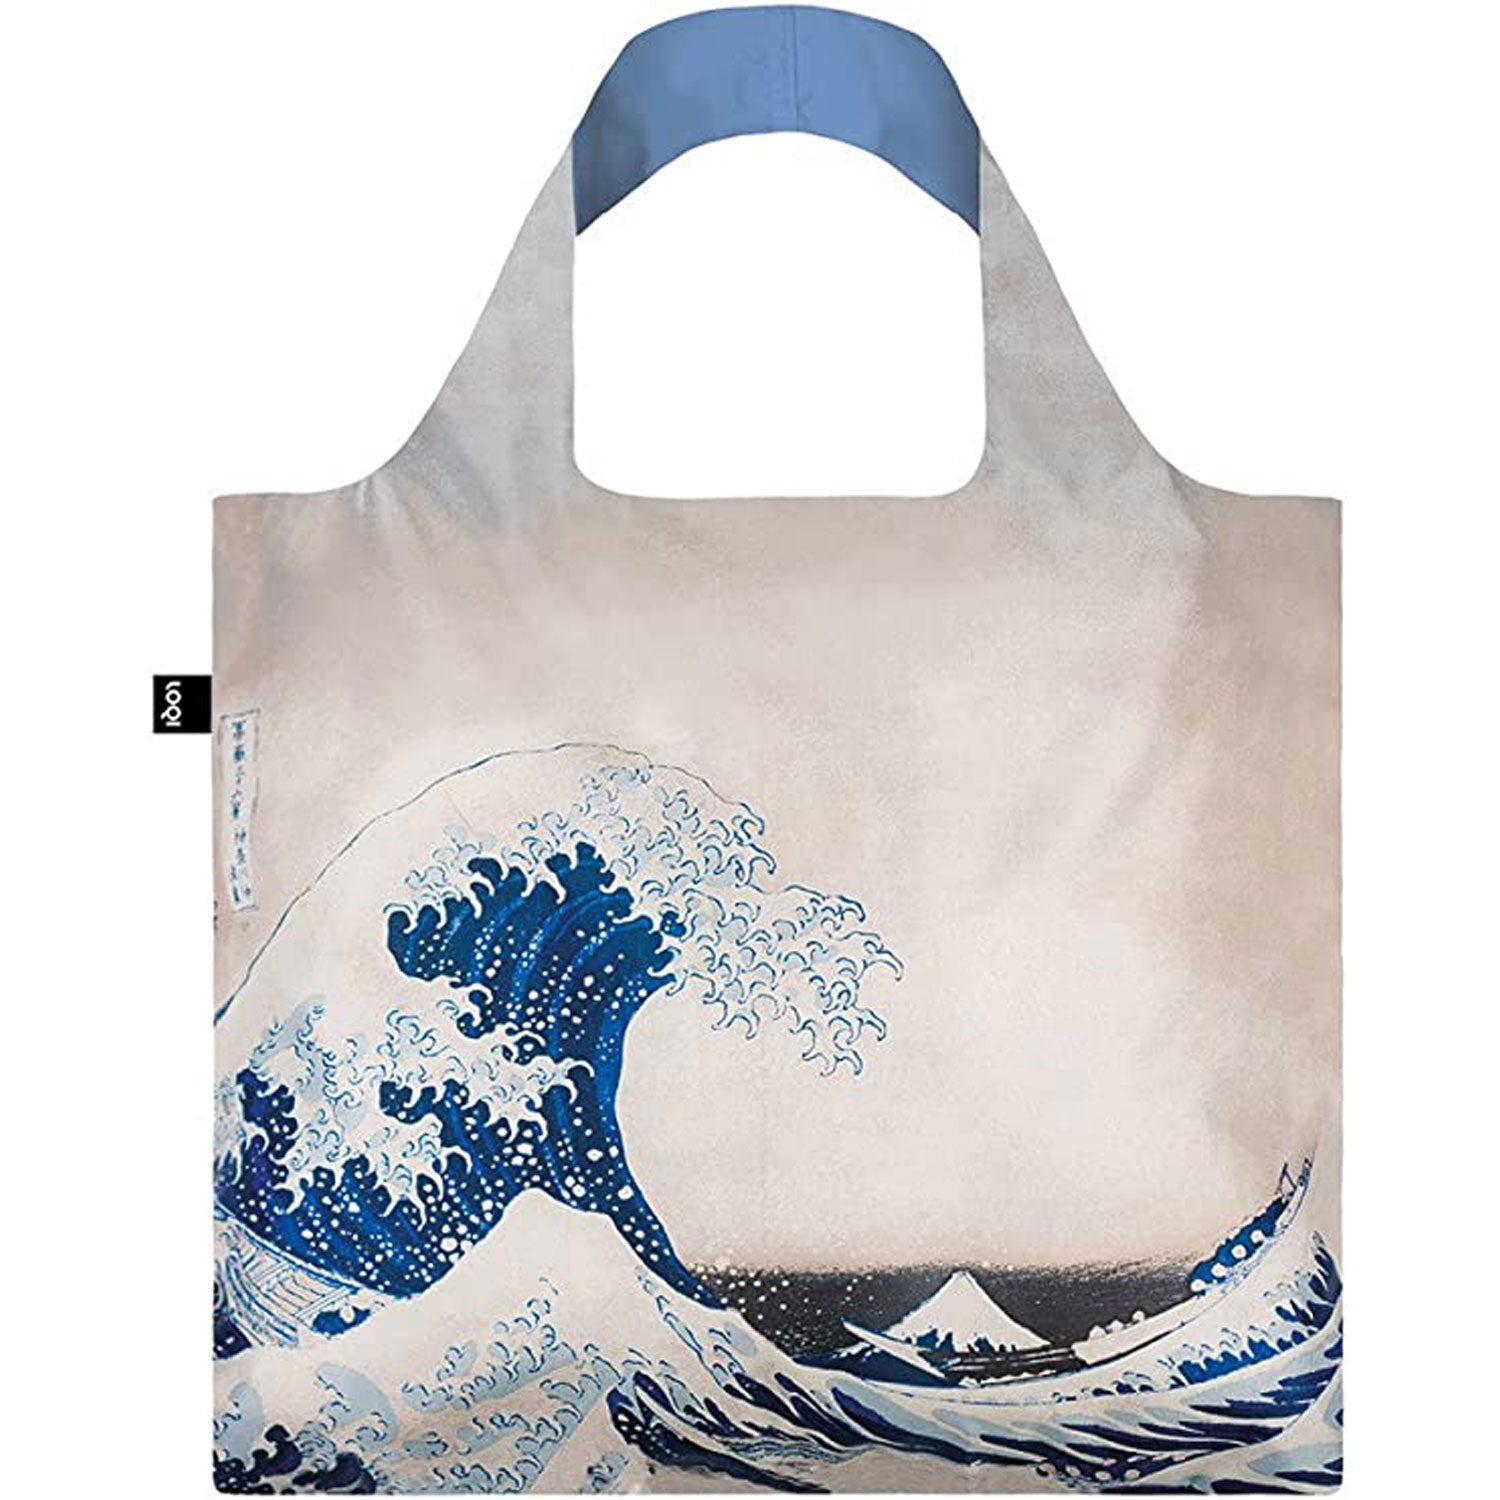 LOQI bag "The Great Wave"